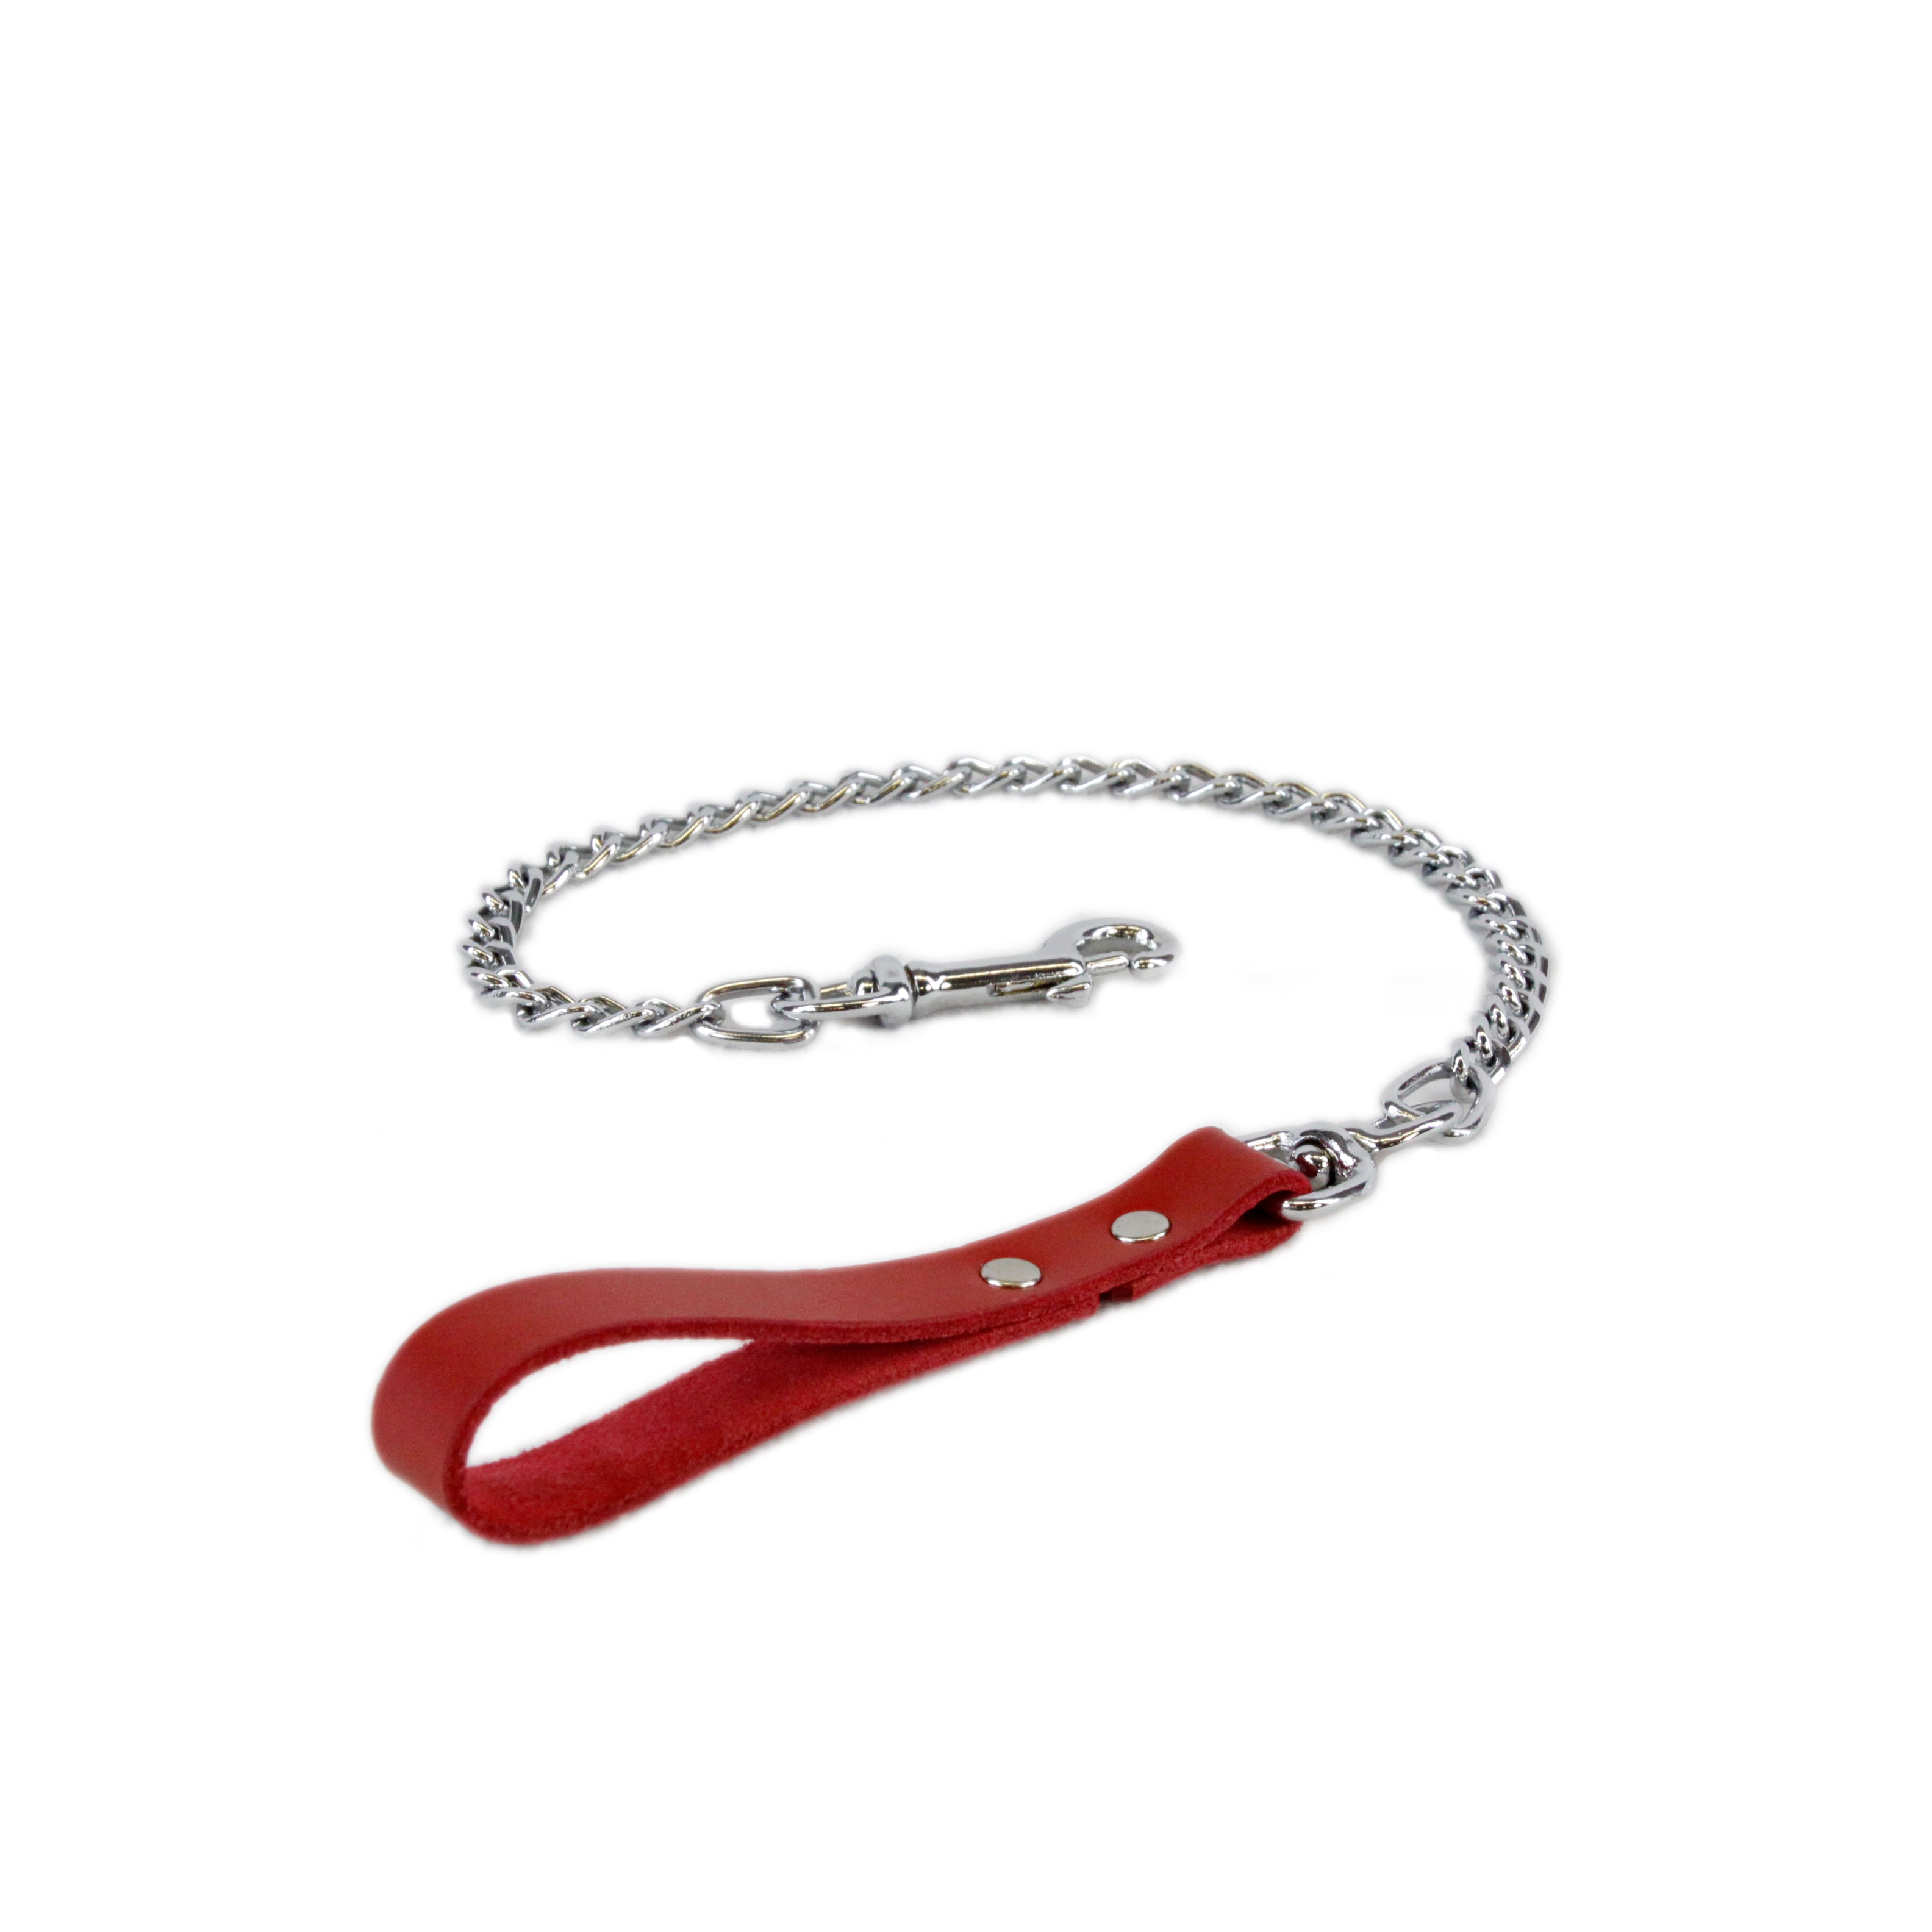 red Pawstar leather handled metal leash.